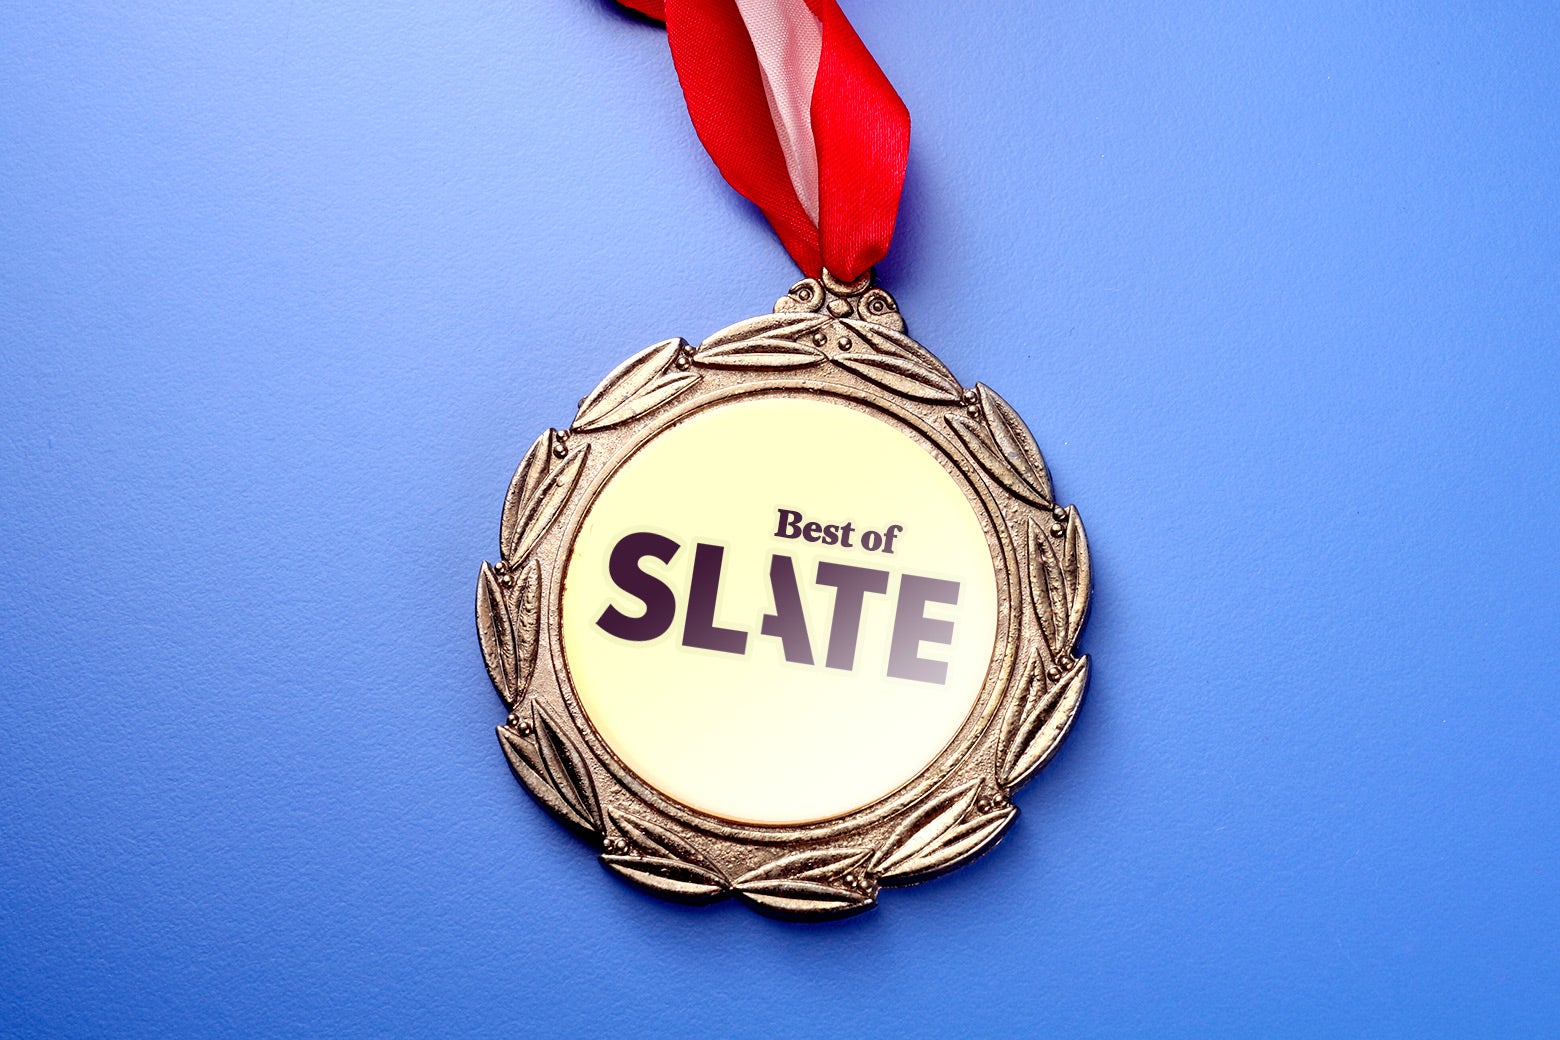 A Best of Slate medal